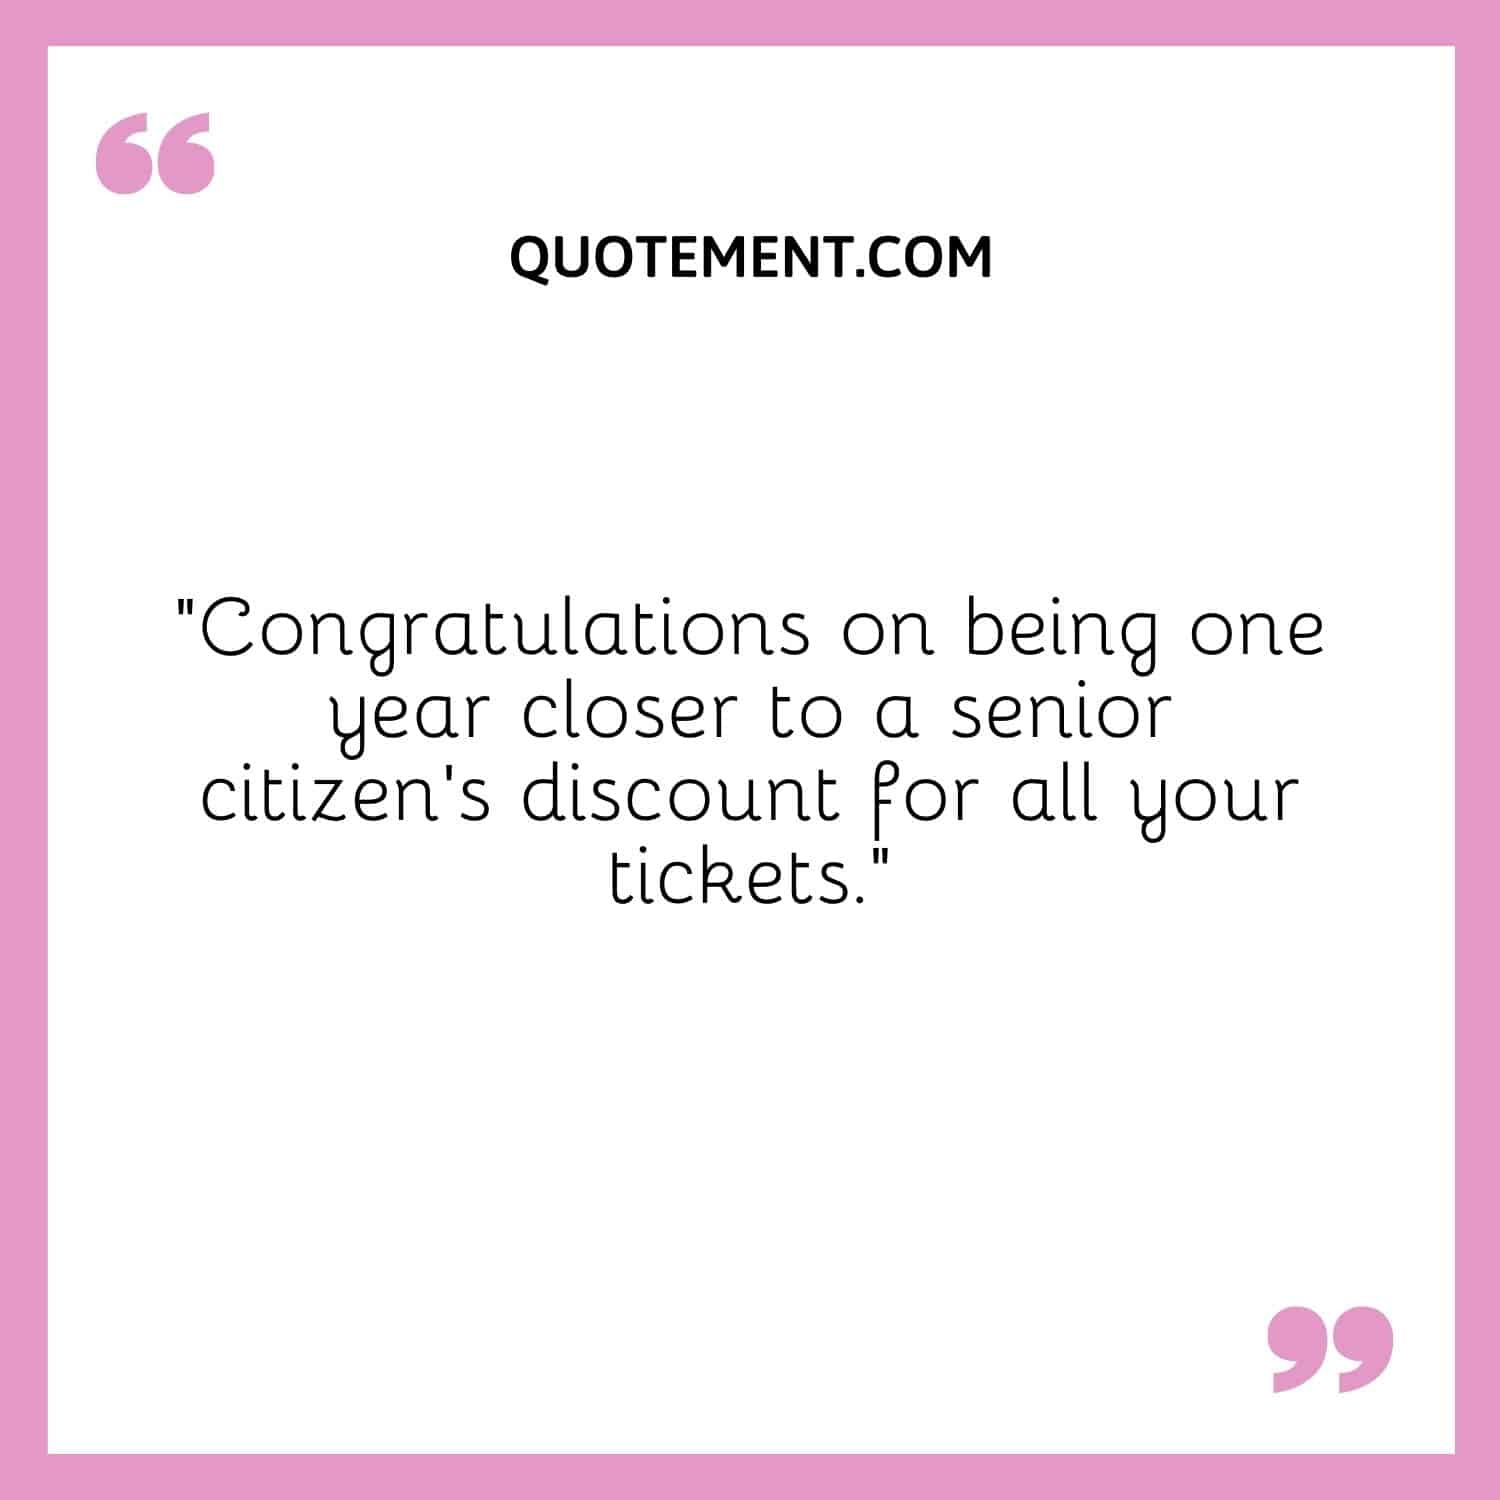 “Congratulations on being one year closer to a senior citizen’s discount for all your tickets.”